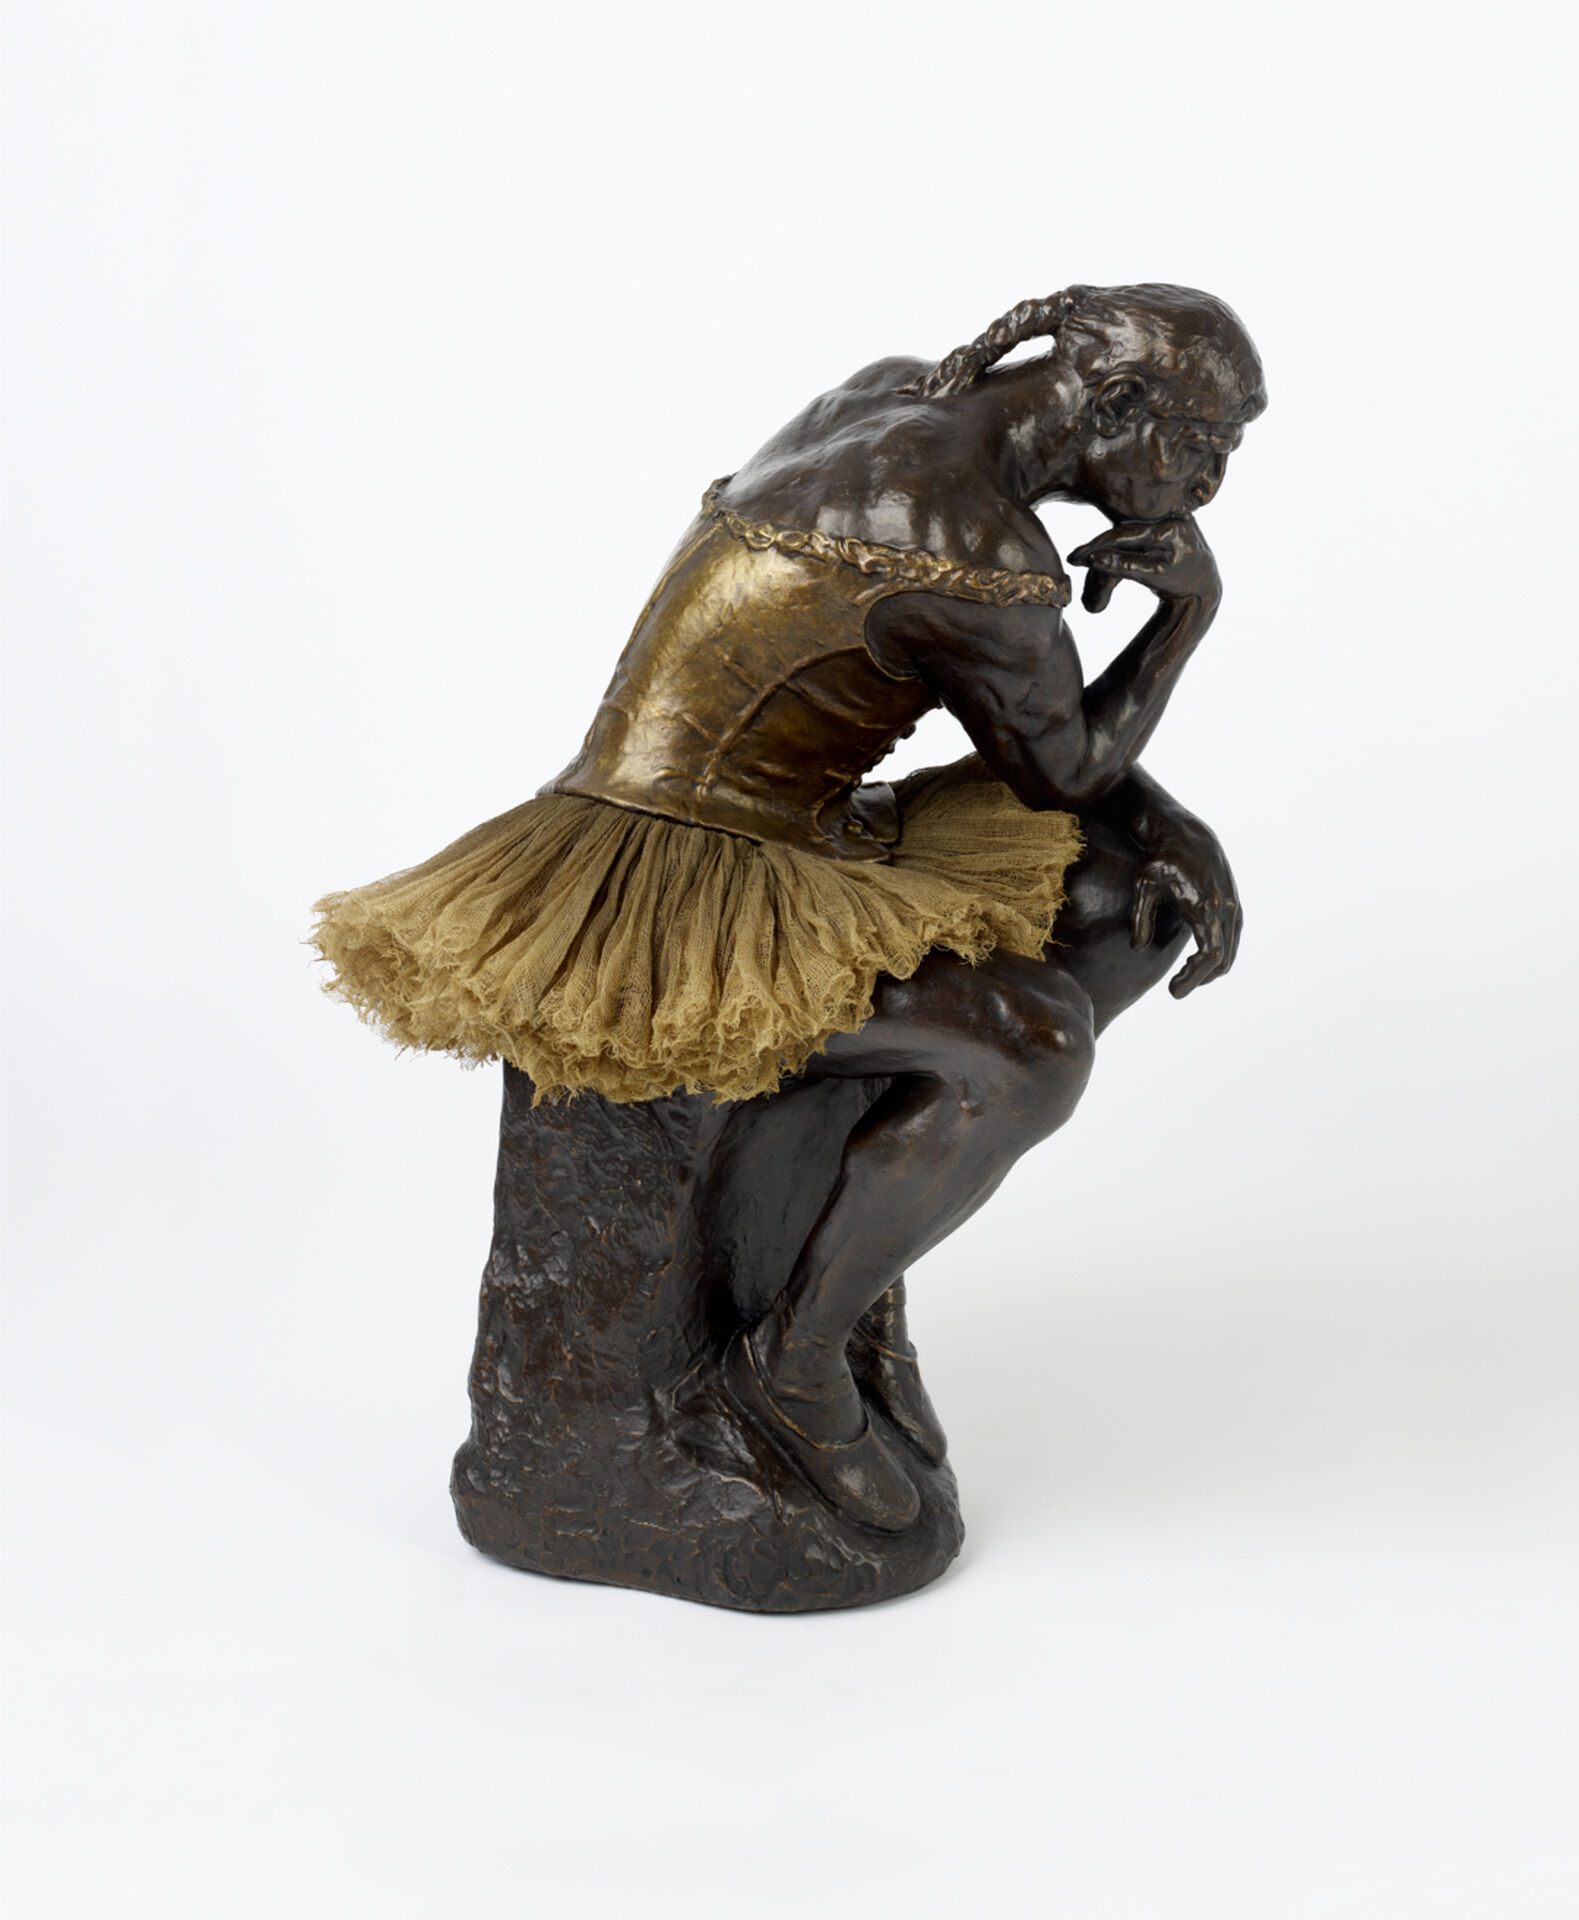 Nancy Fouts The Thinker (after Rodin/Degas), 2014, 2014 Bronze and gauze. Nancy Fouts’ Private Collection. © Nancy Fouts. Photo: Dominic Lee.